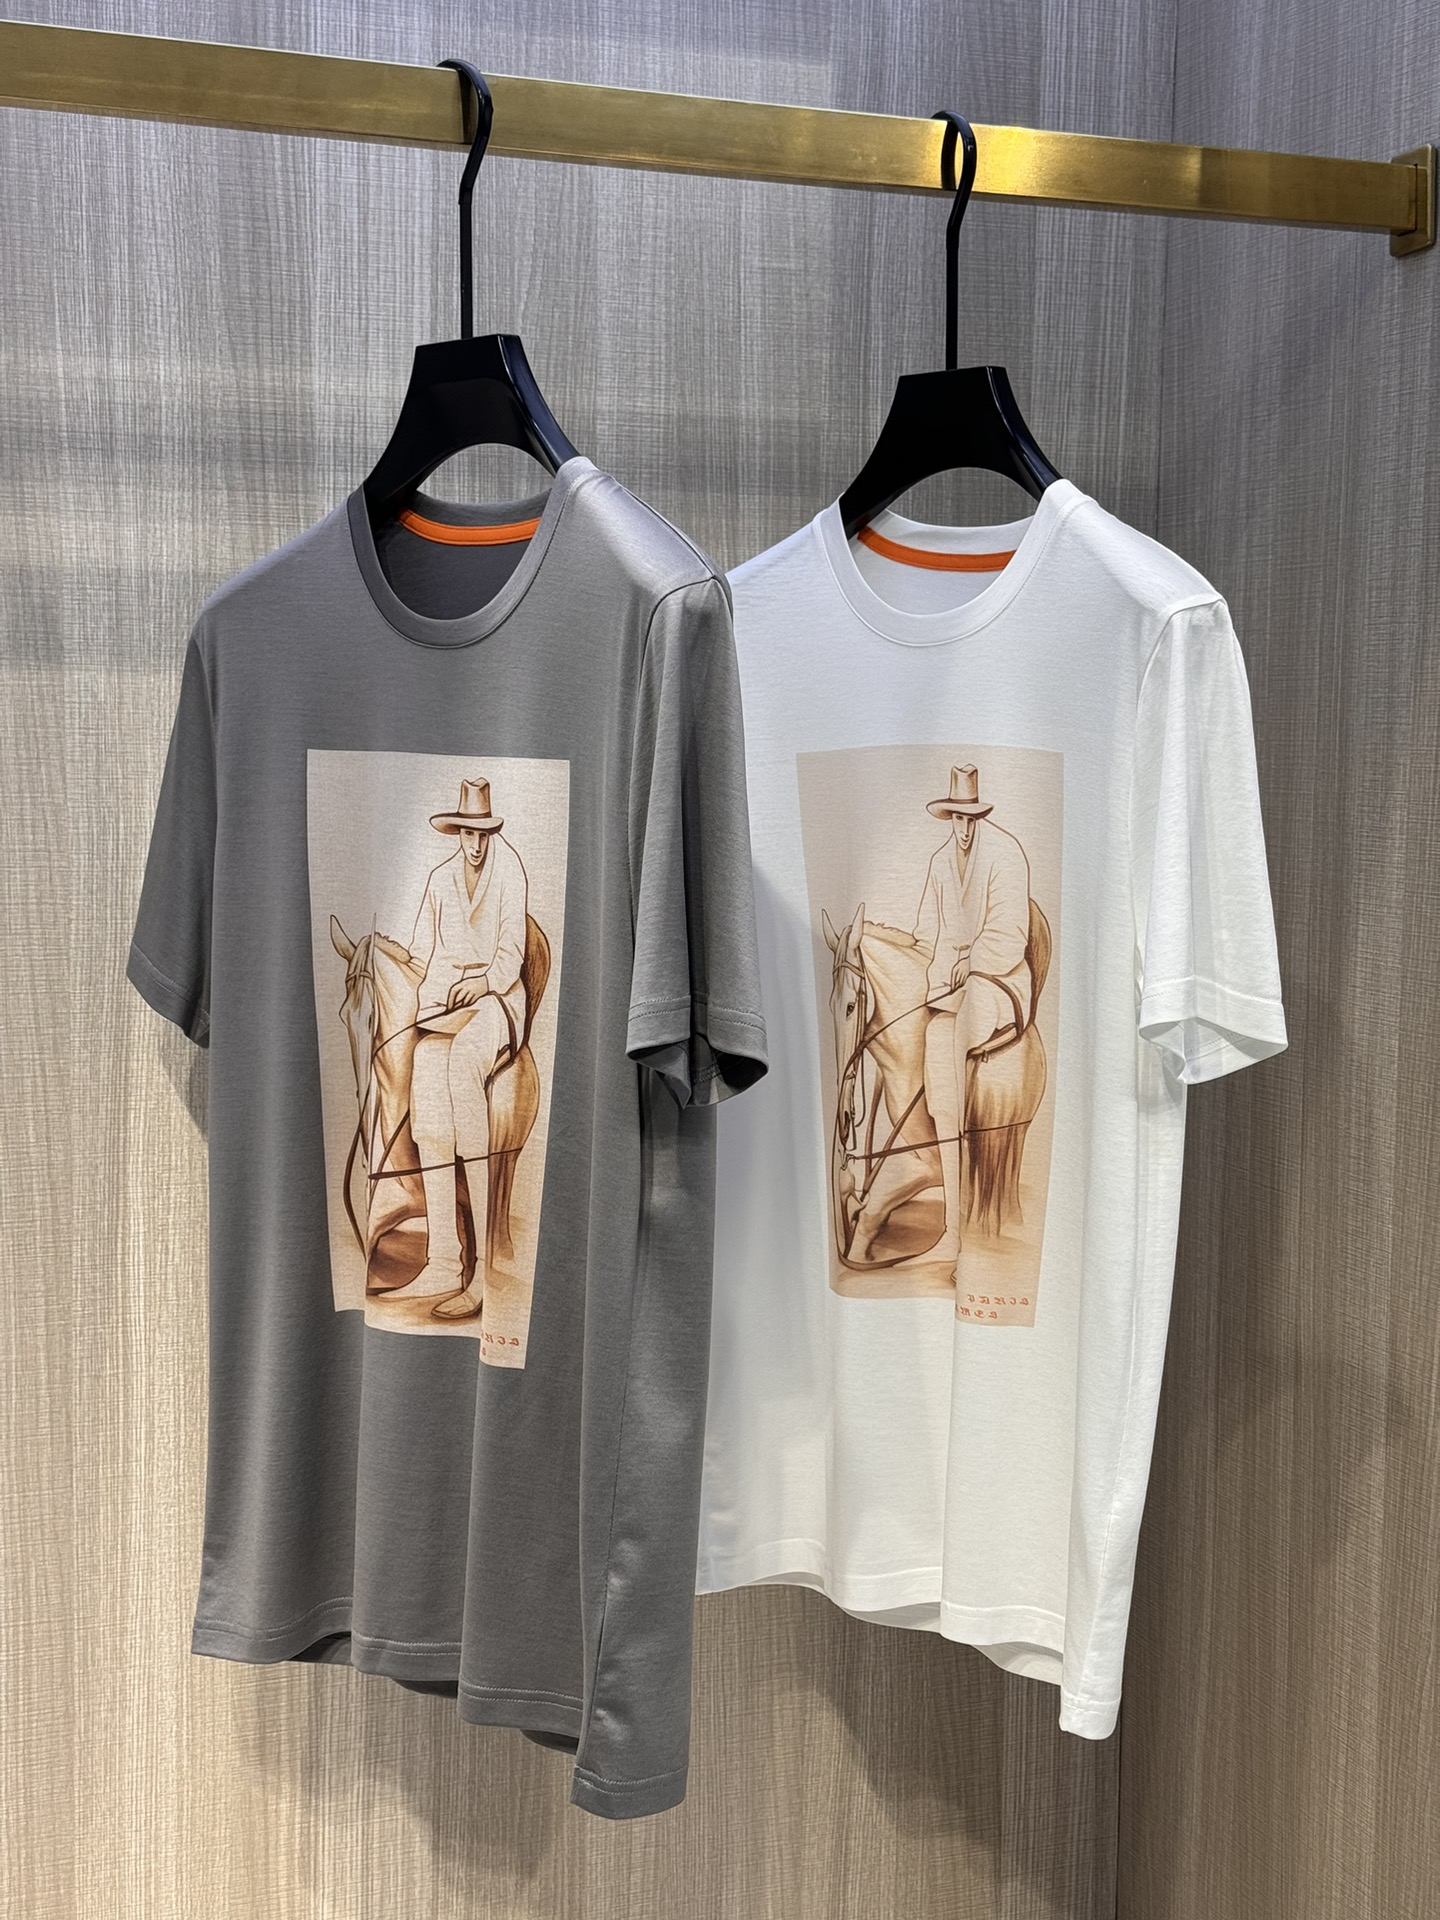 Hermes Clothing T-Shirt Grey White Printing Men Cotton Mercerized Spring/Summer Collection